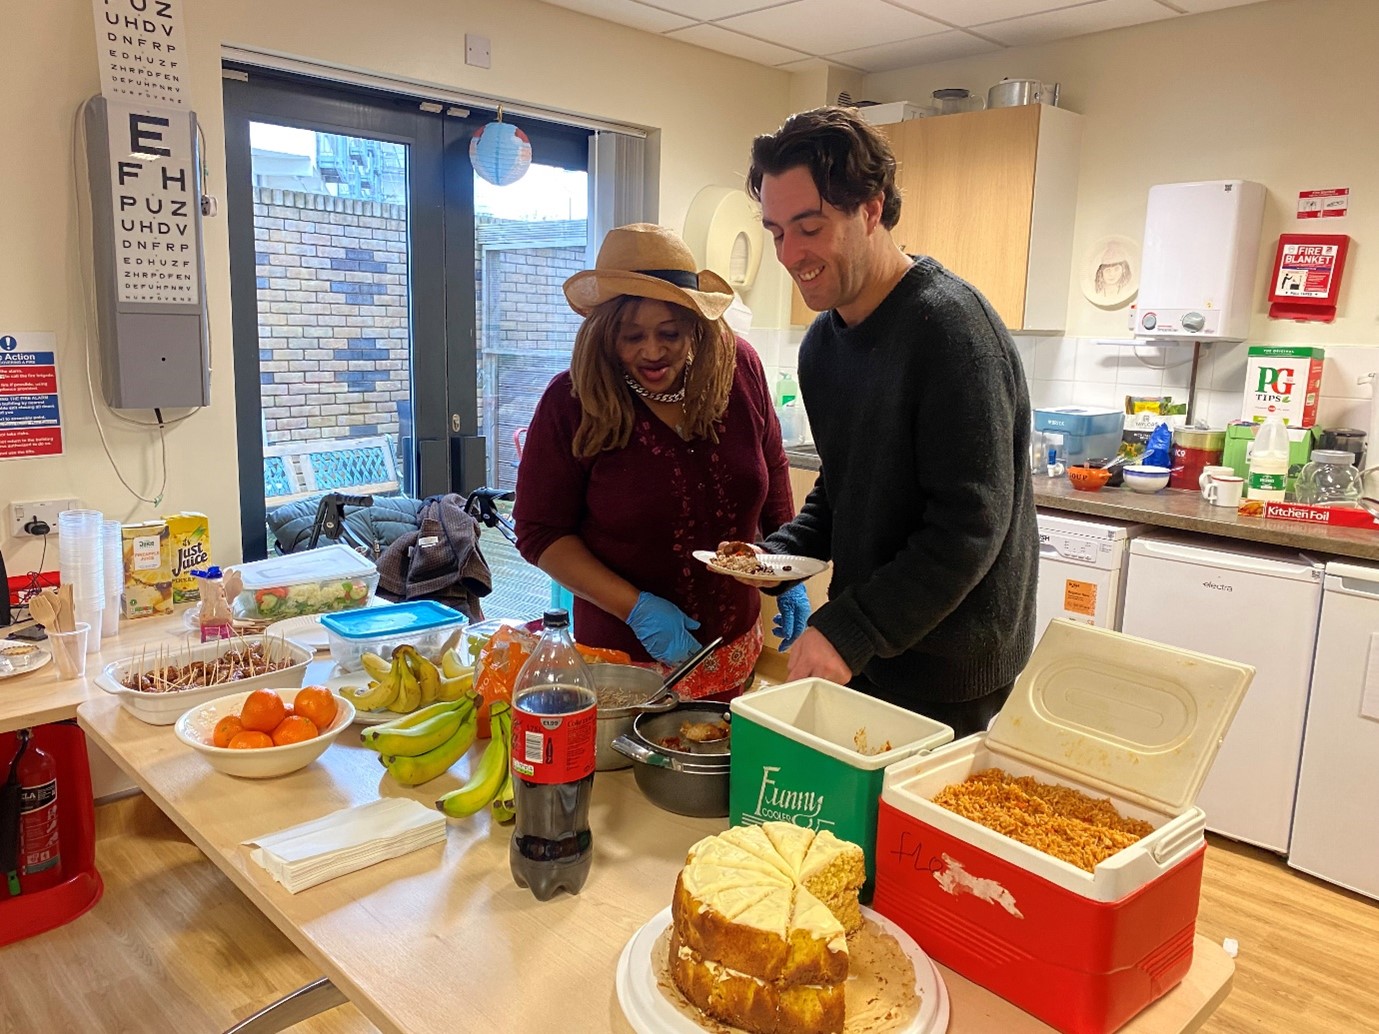 Black woman in a straw hat and kitchen gloves is smiling and chatting to a younger White man holding a plate of food. They're laughing and chatting over a table full of food.